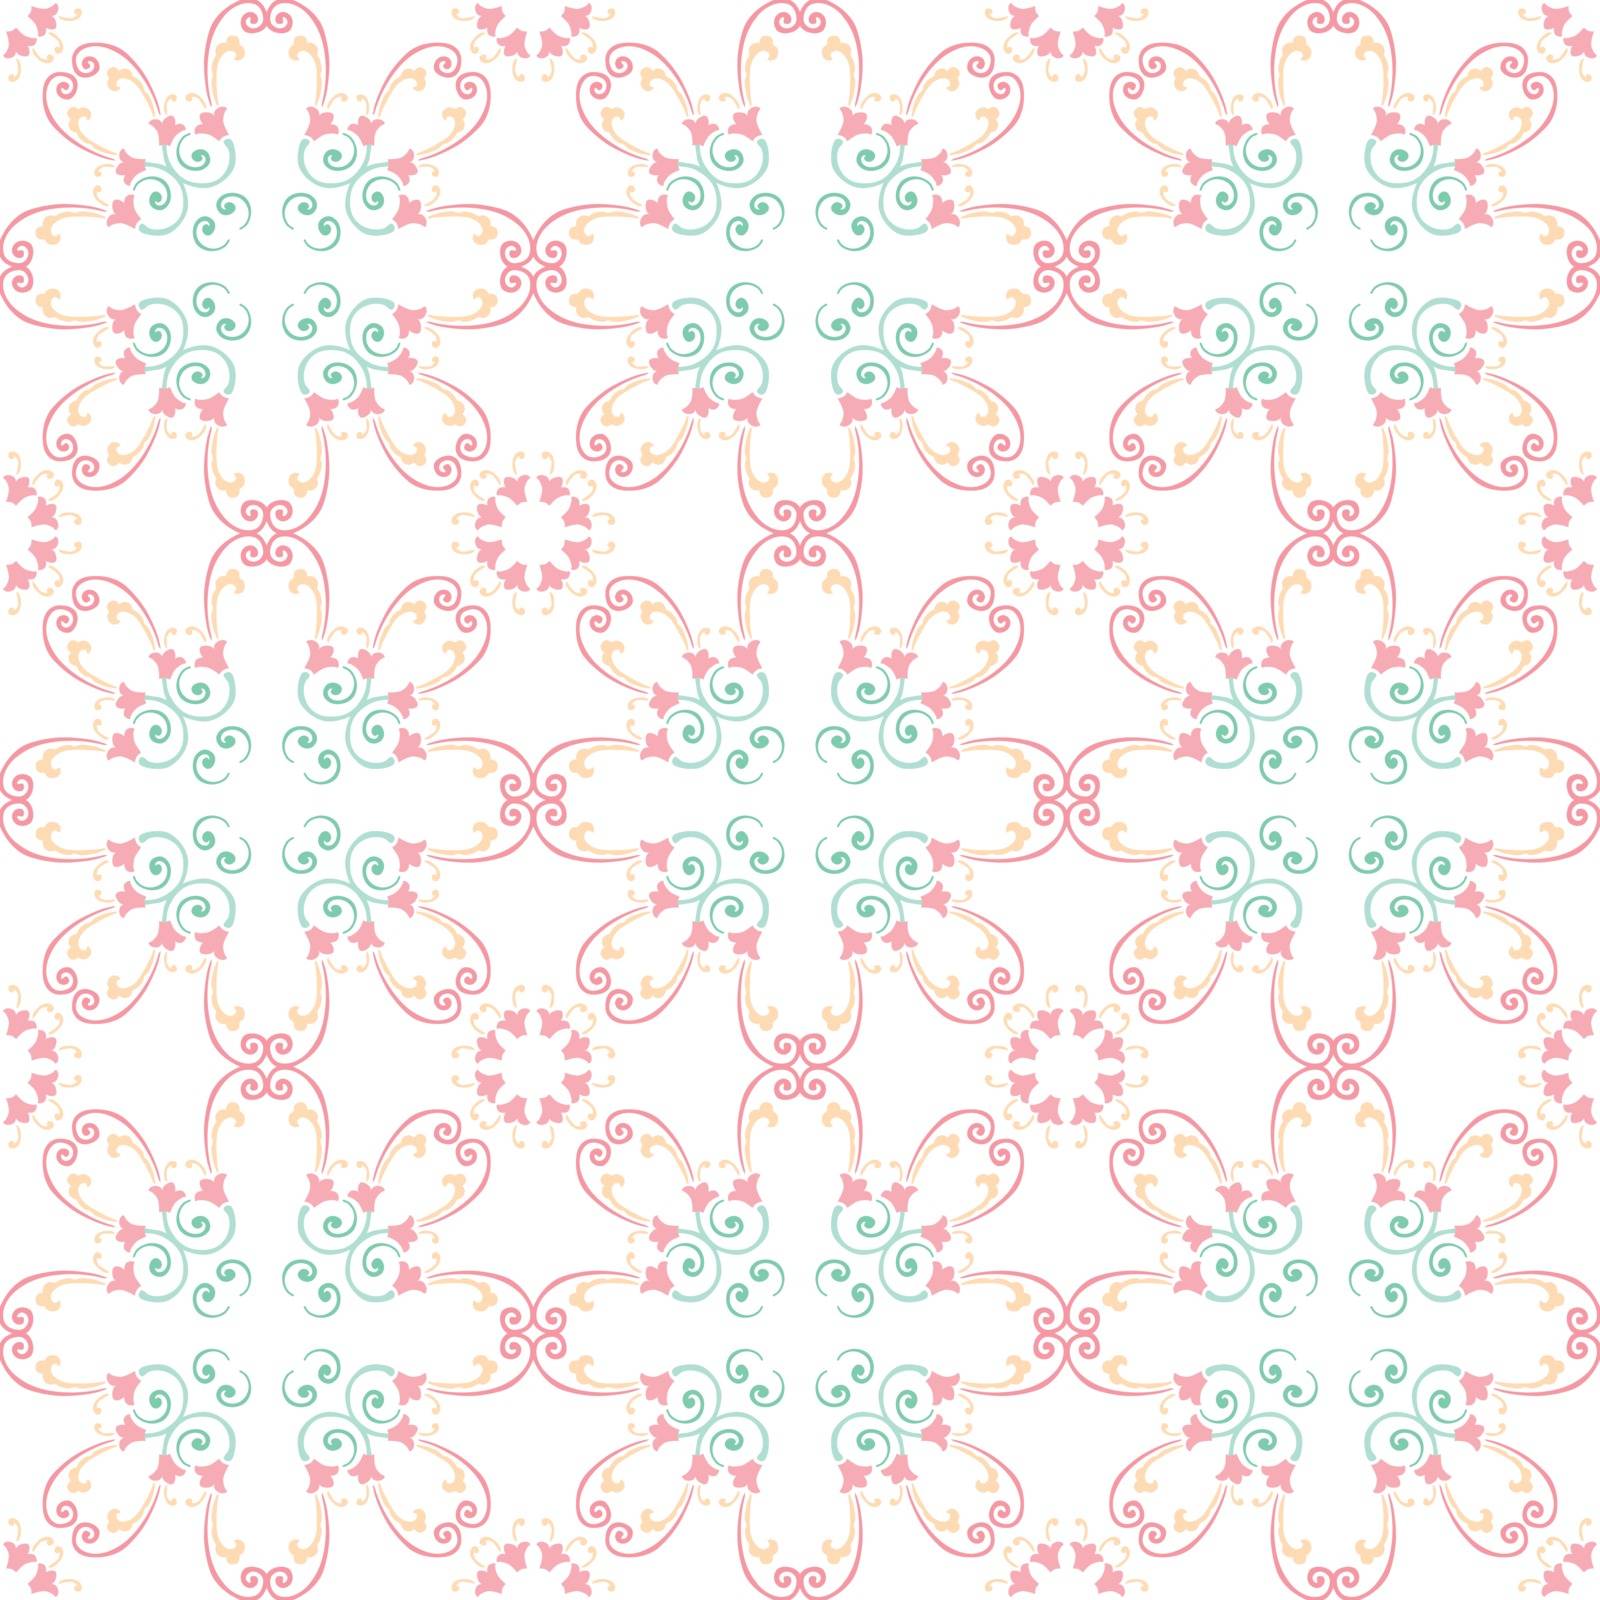 Seamless illustrated pattern made of pastel floral lements and swirls on white
